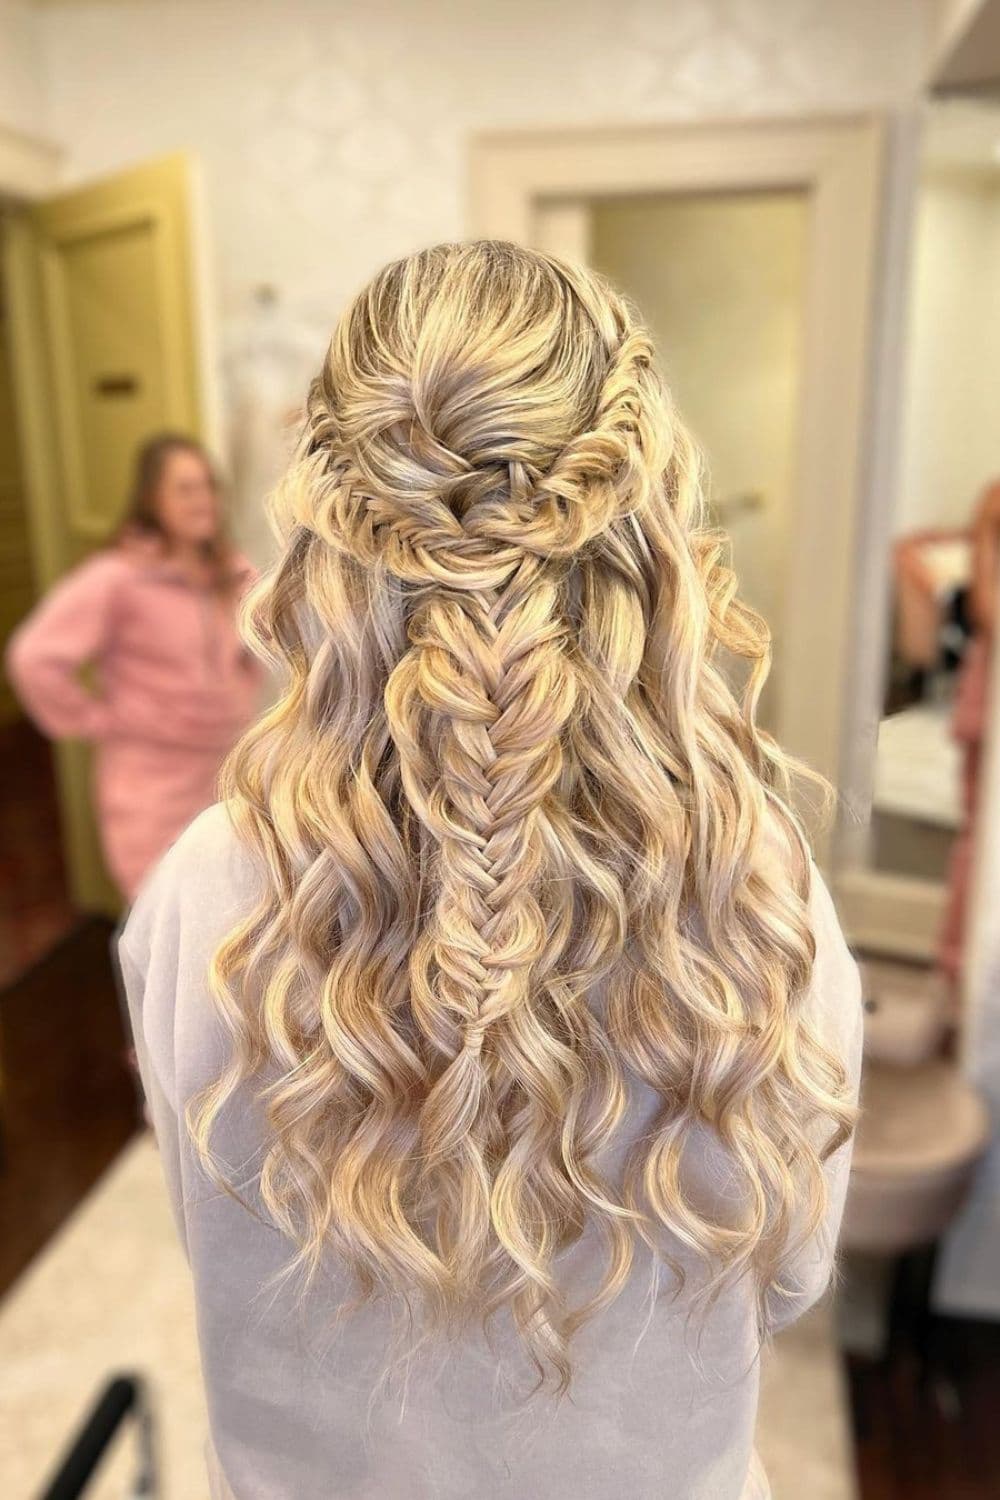 A woman with a blonde milkmaid fishtail braid.